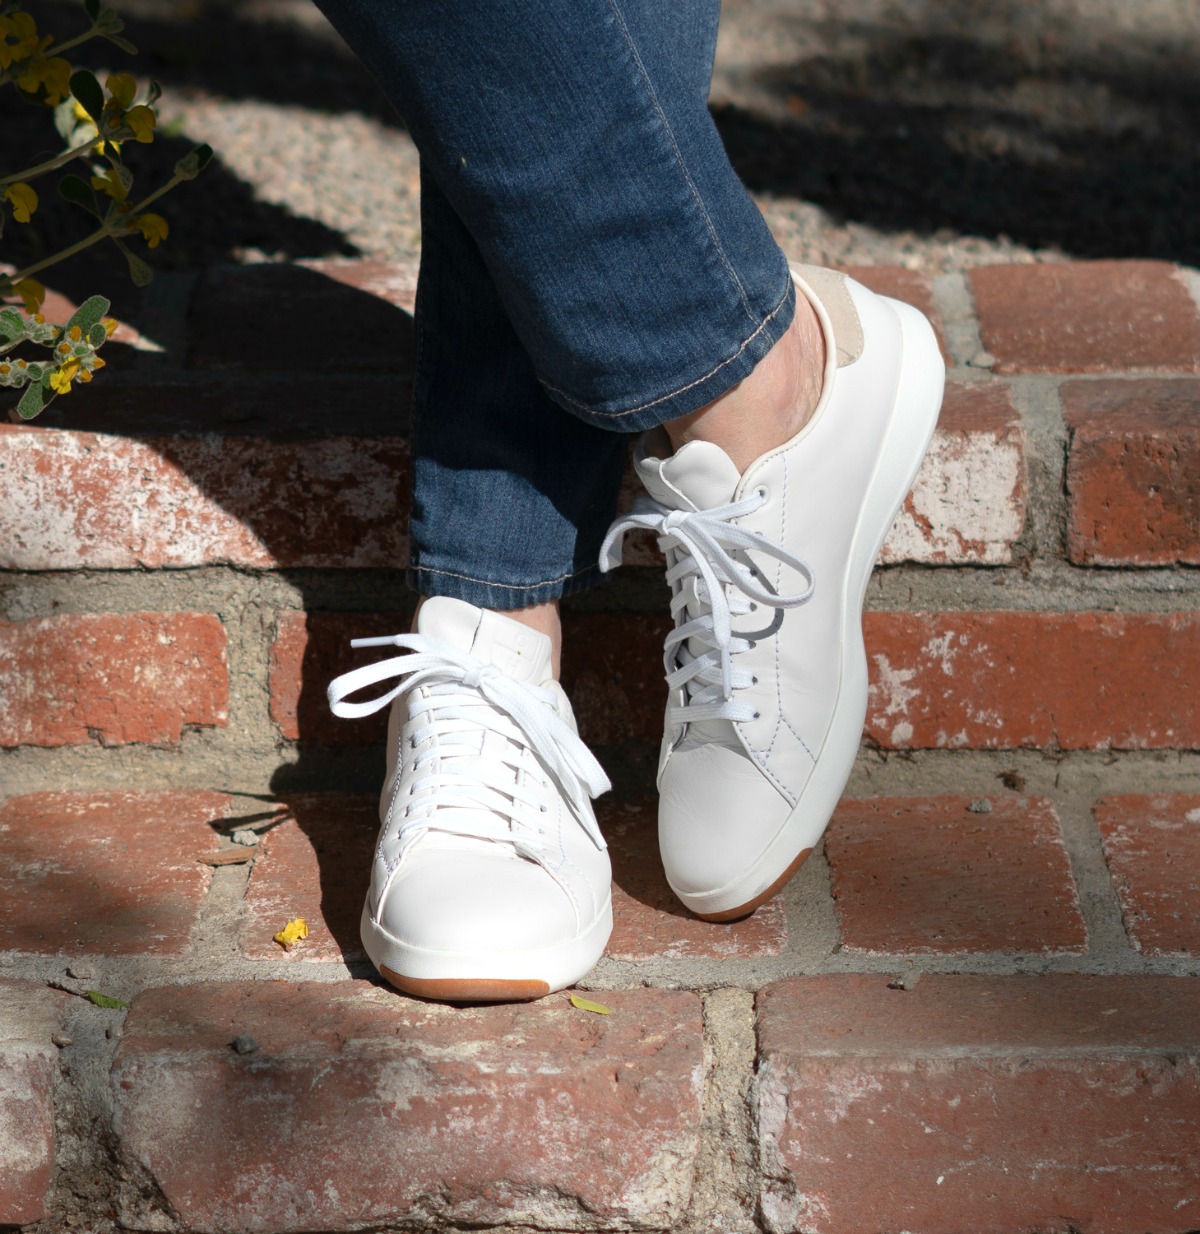 Classic white sneakers from Cole Haan. Details at une femme d'un certain age.